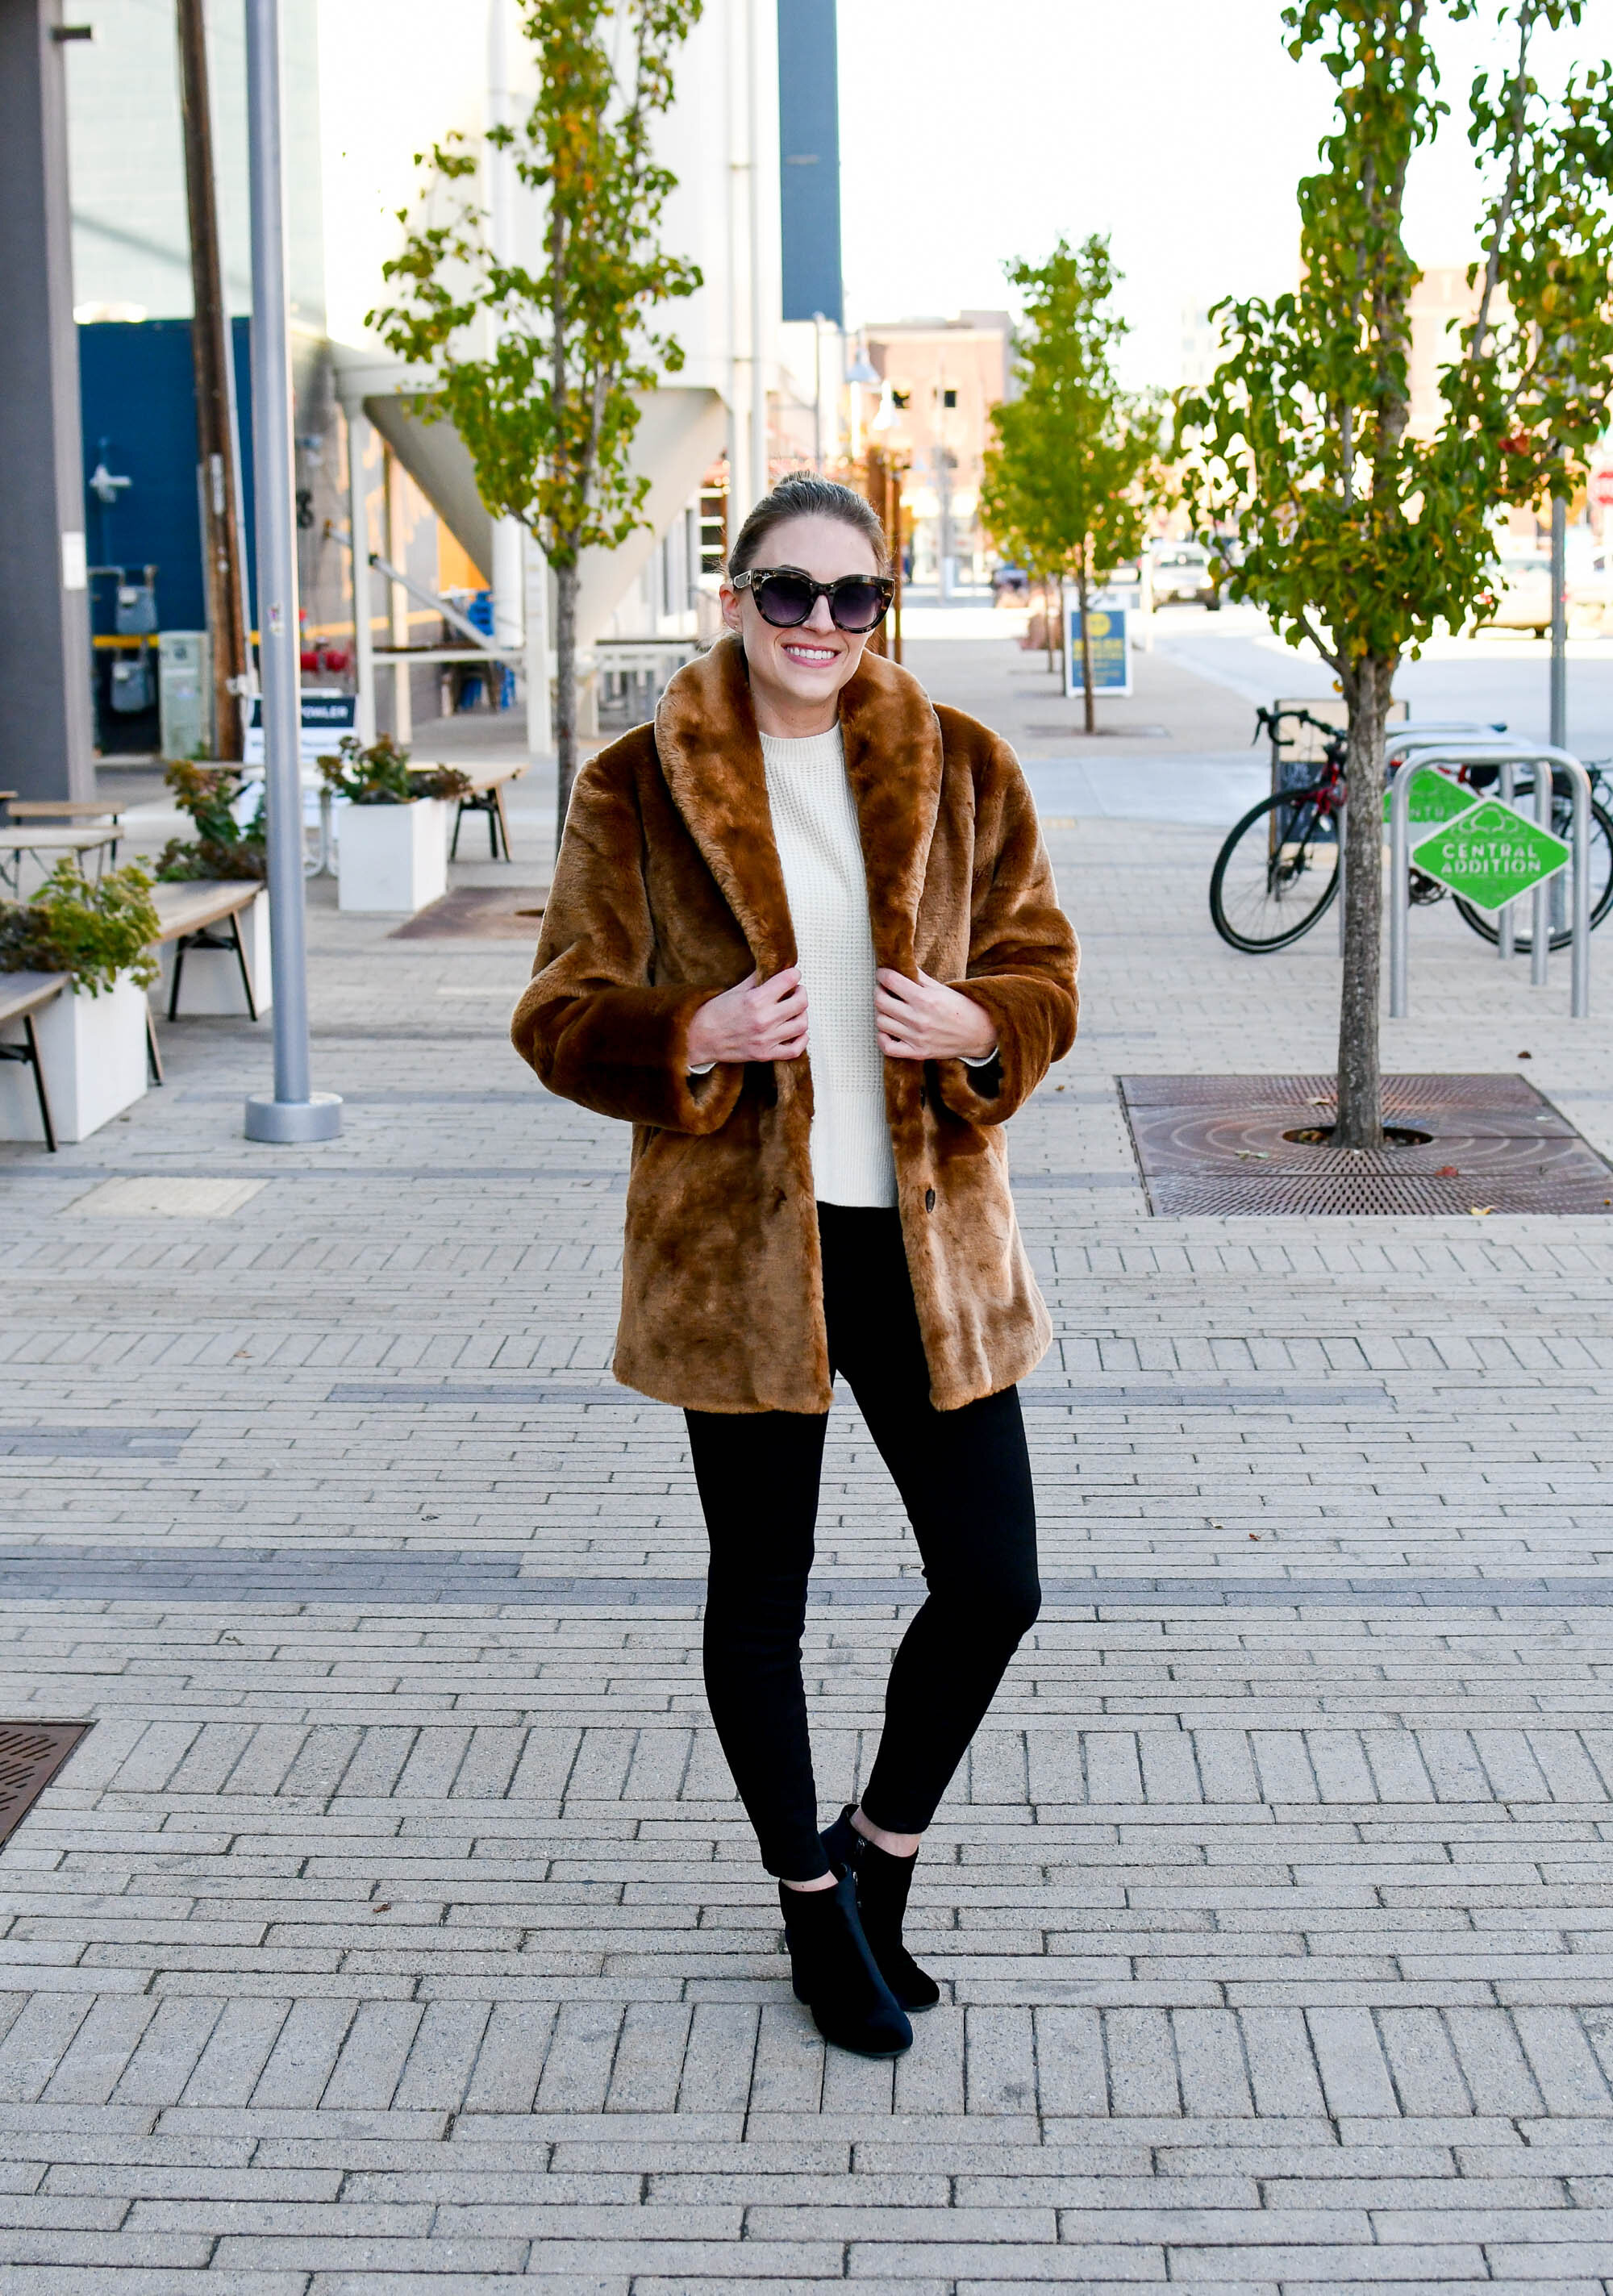 Dress like a calico cat / fall outfit — Cotton Cashmere Cat Hair